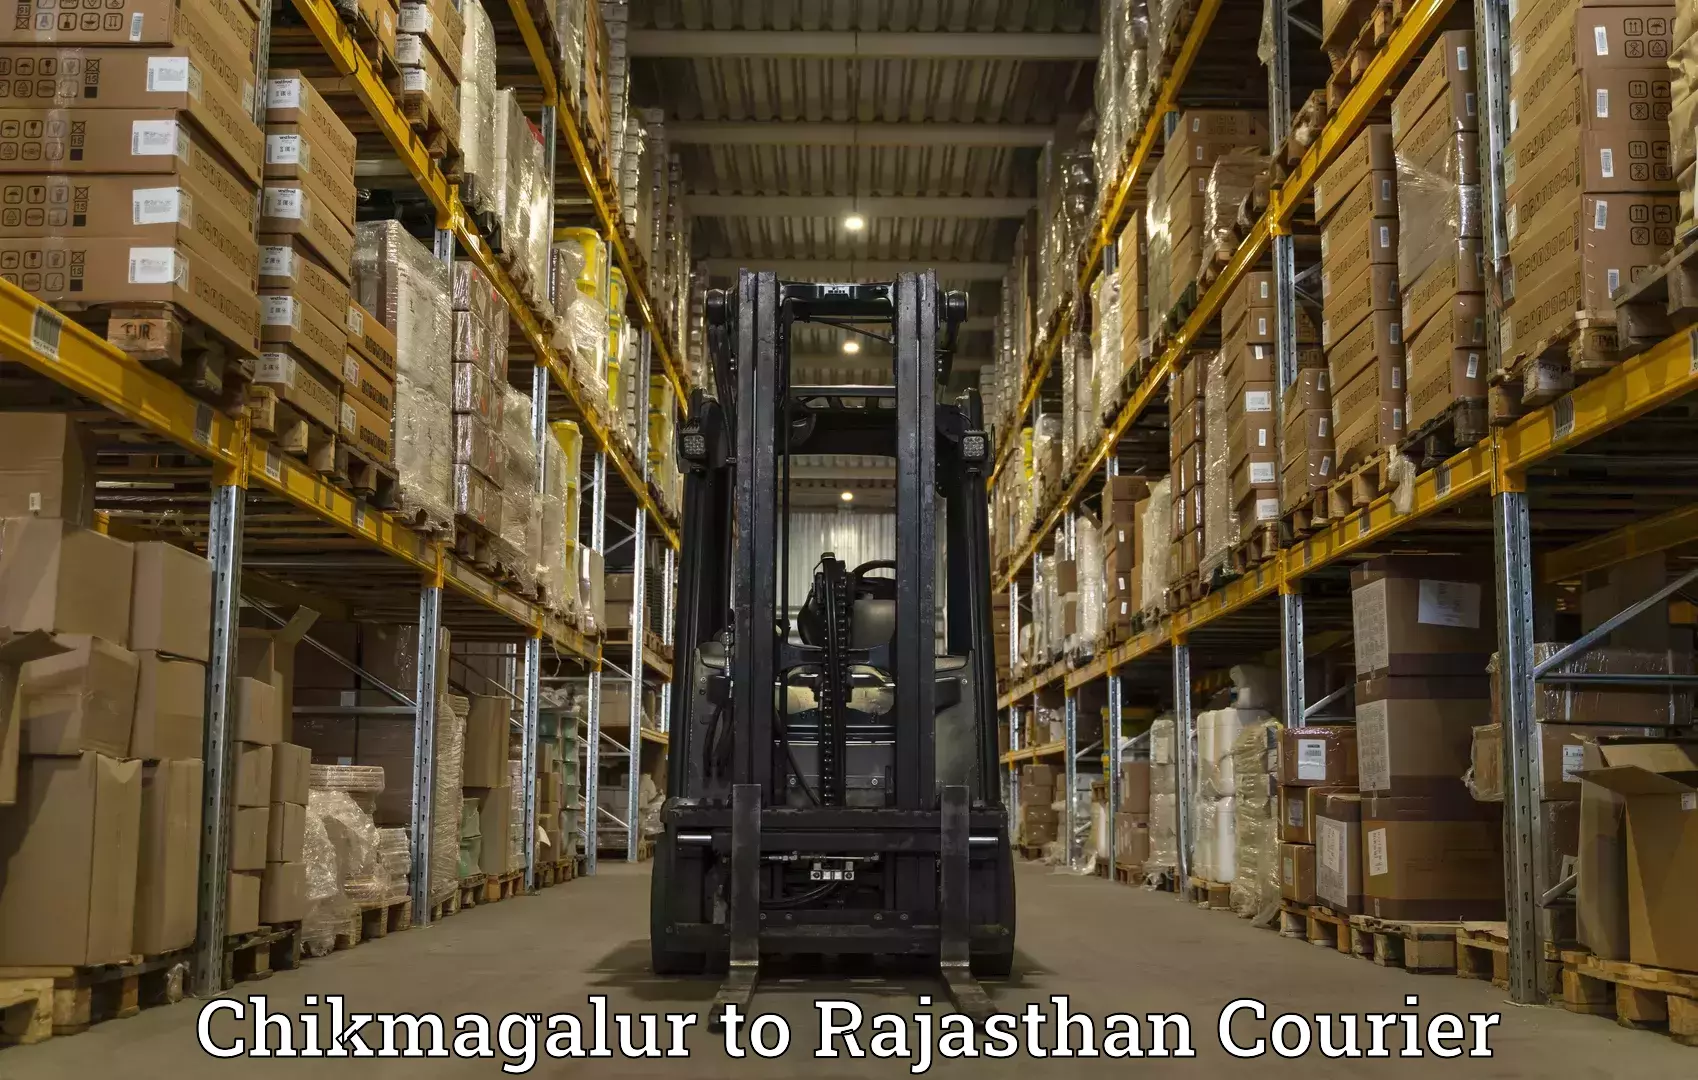 State-of-the-art courier technology Chikmagalur to Chaumahla